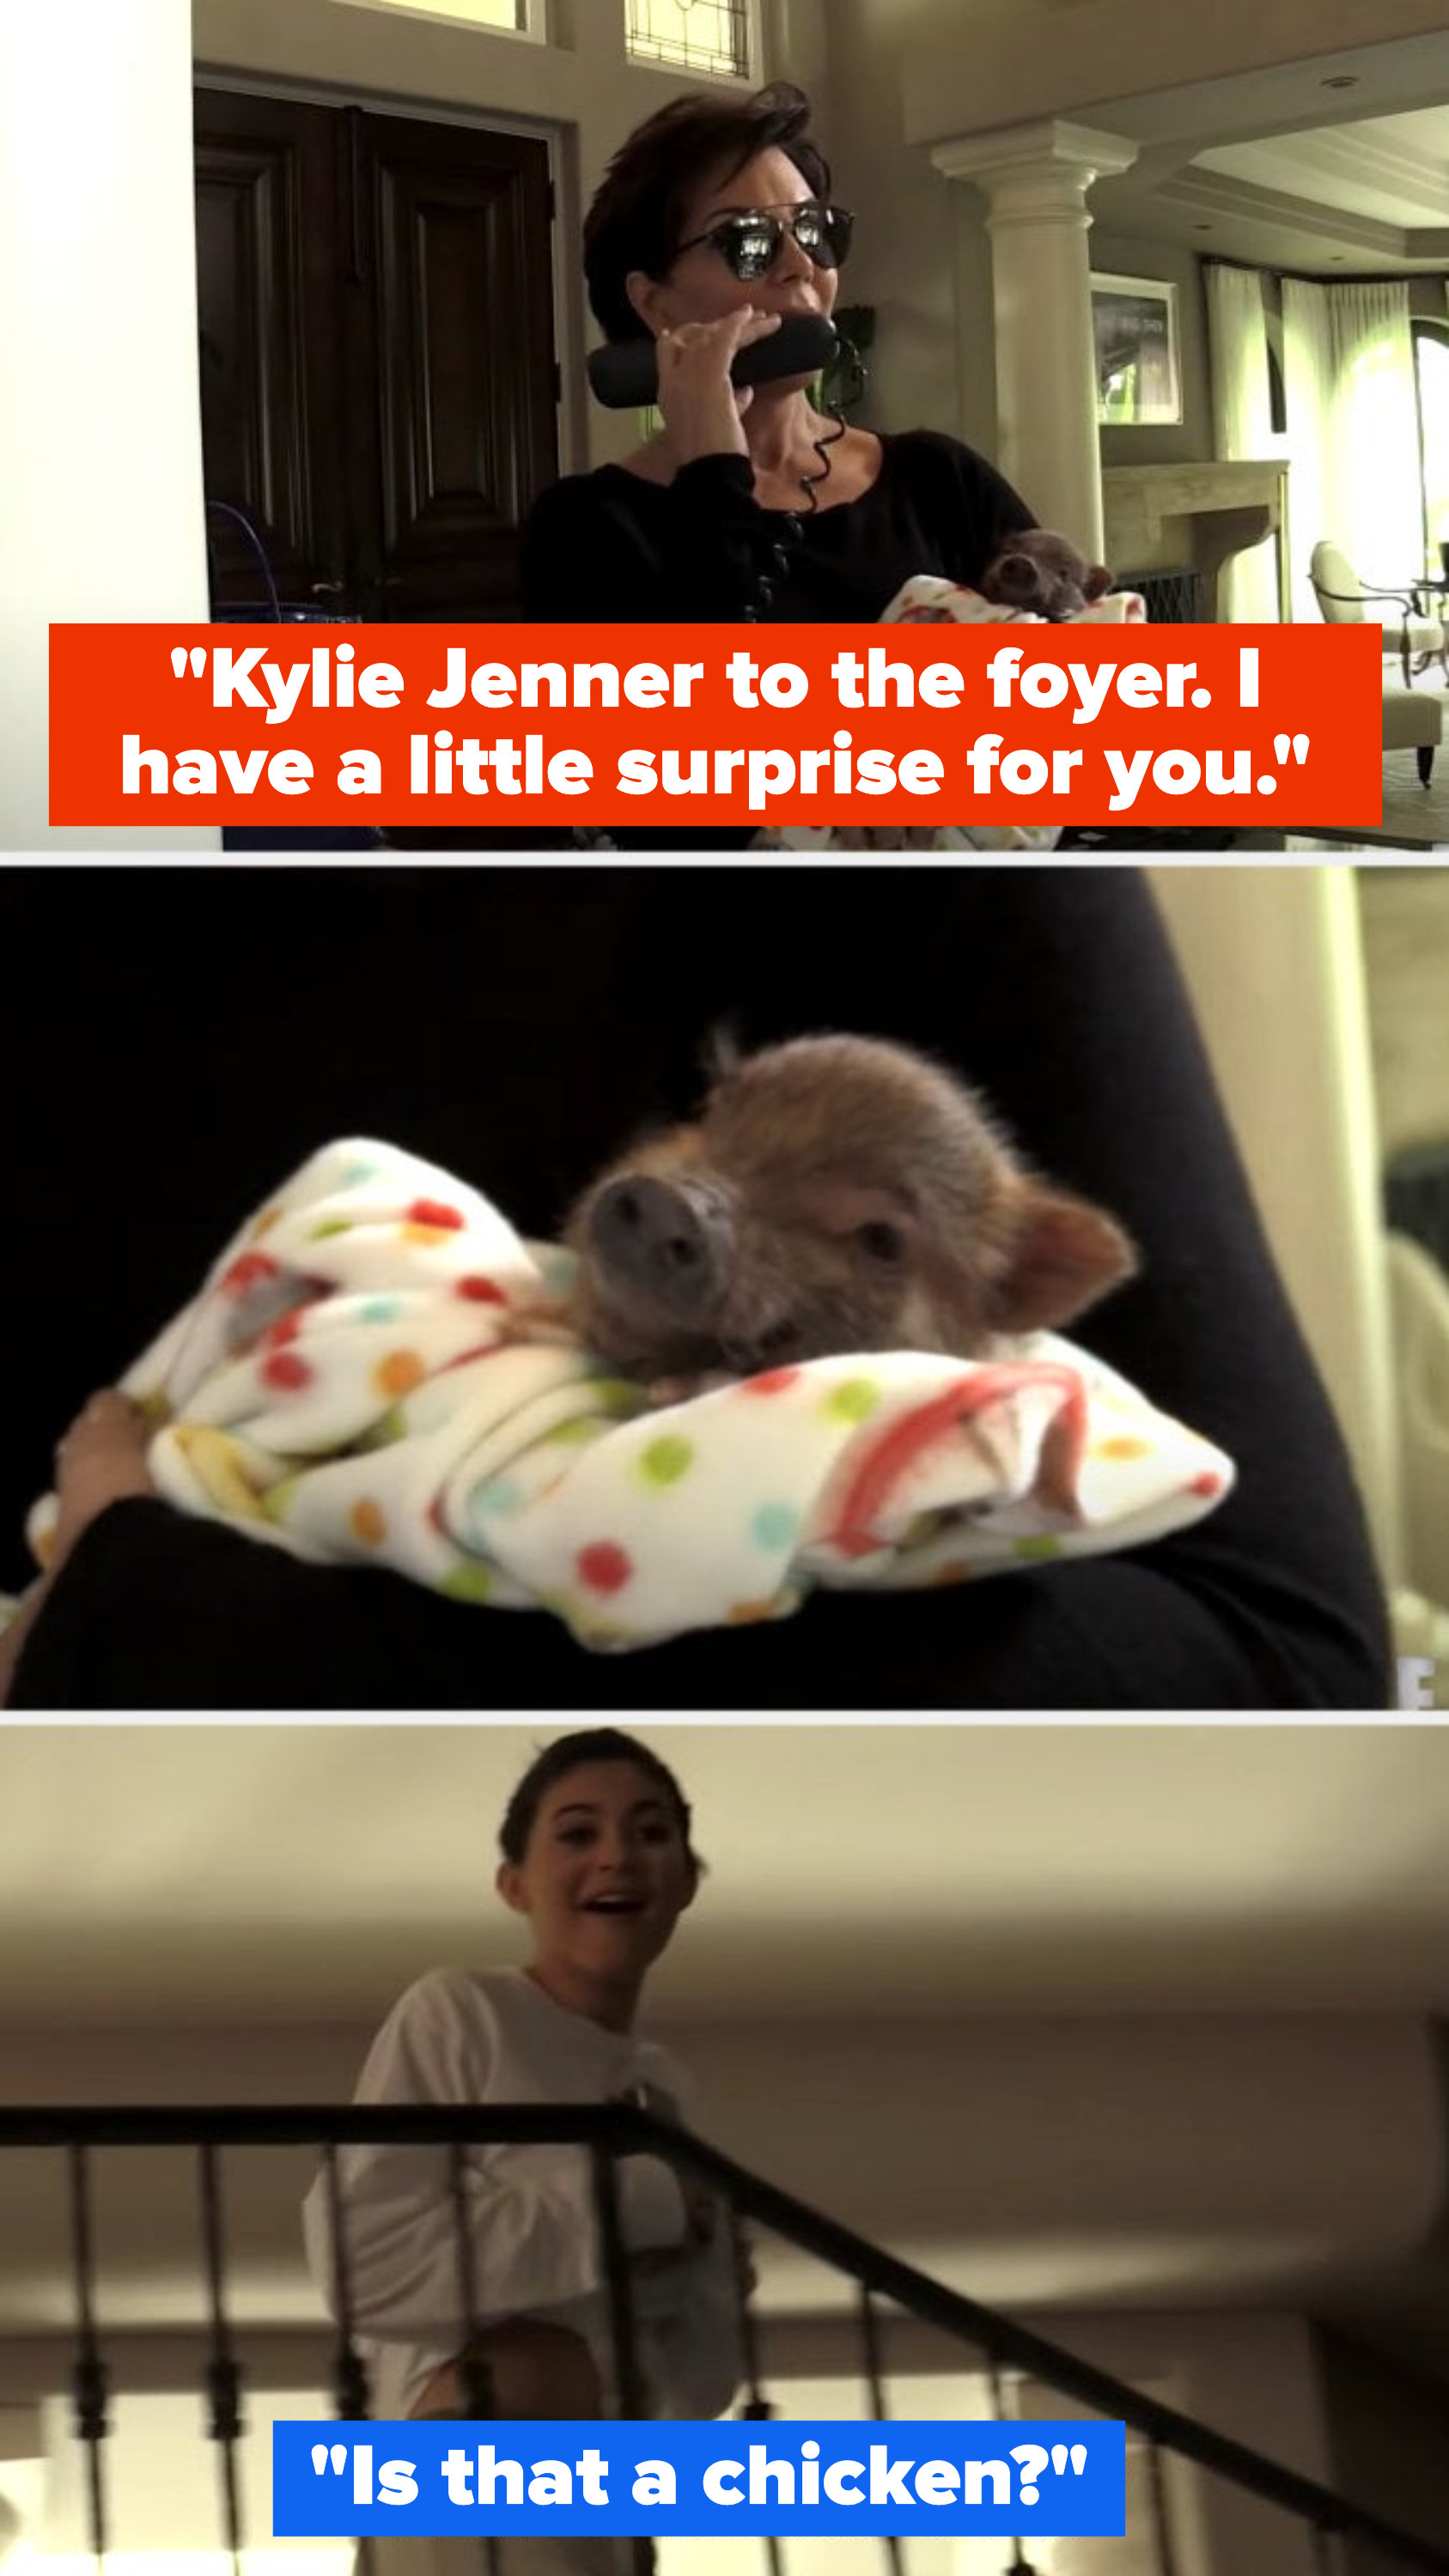 On Keeping Up With the Kardashians, Kris pages Kylie down, saying she has a surprise. In her arms, she holds a baby pig. Kylie comes to the stairs and says &quot;Is that a chicken?&quot;